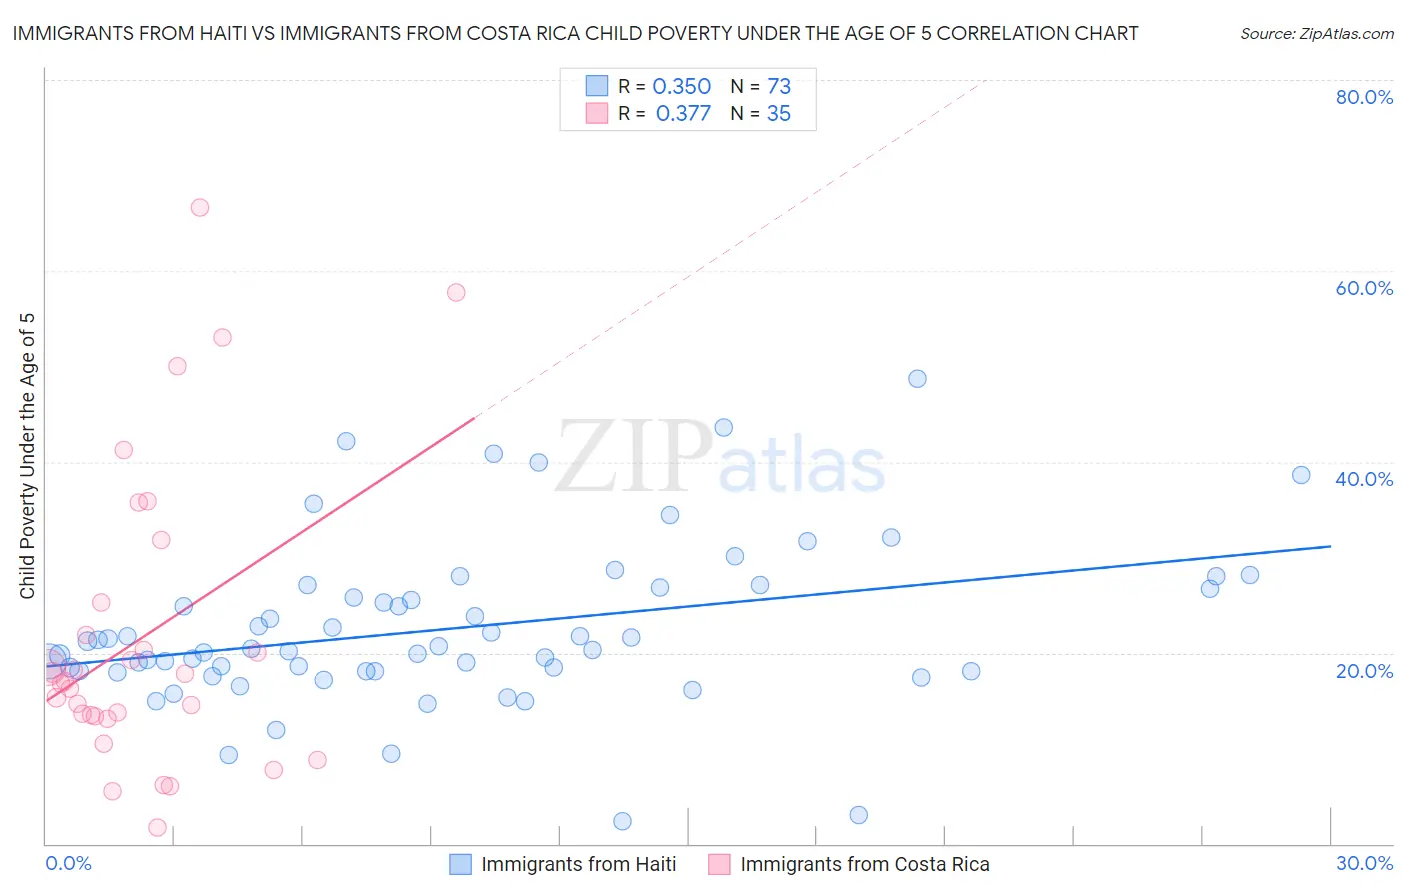 Immigrants from Haiti vs Immigrants from Costa Rica Child Poverty Under the Age of 5